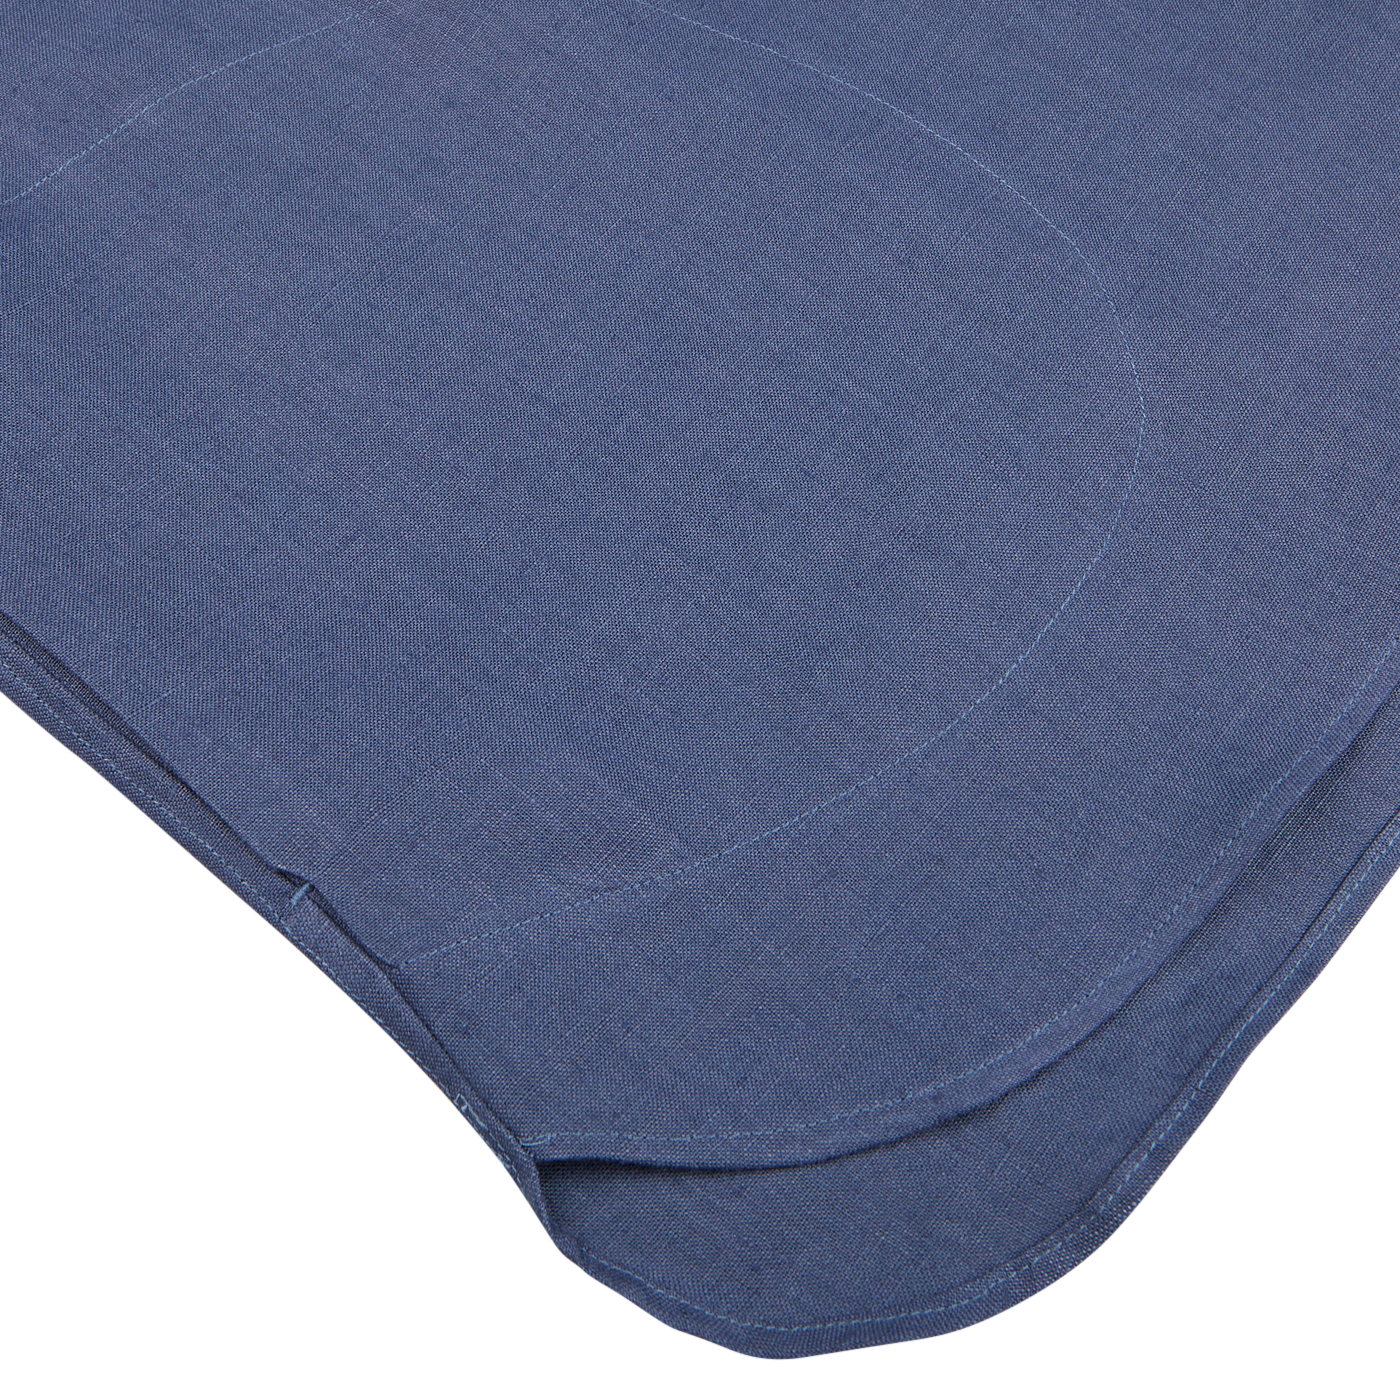 Close-up of a Pastel Blue Belgian Linen Two Pocket Overshirt by De Bonne Facture with visible stitching and textured design, isolated on a white background.